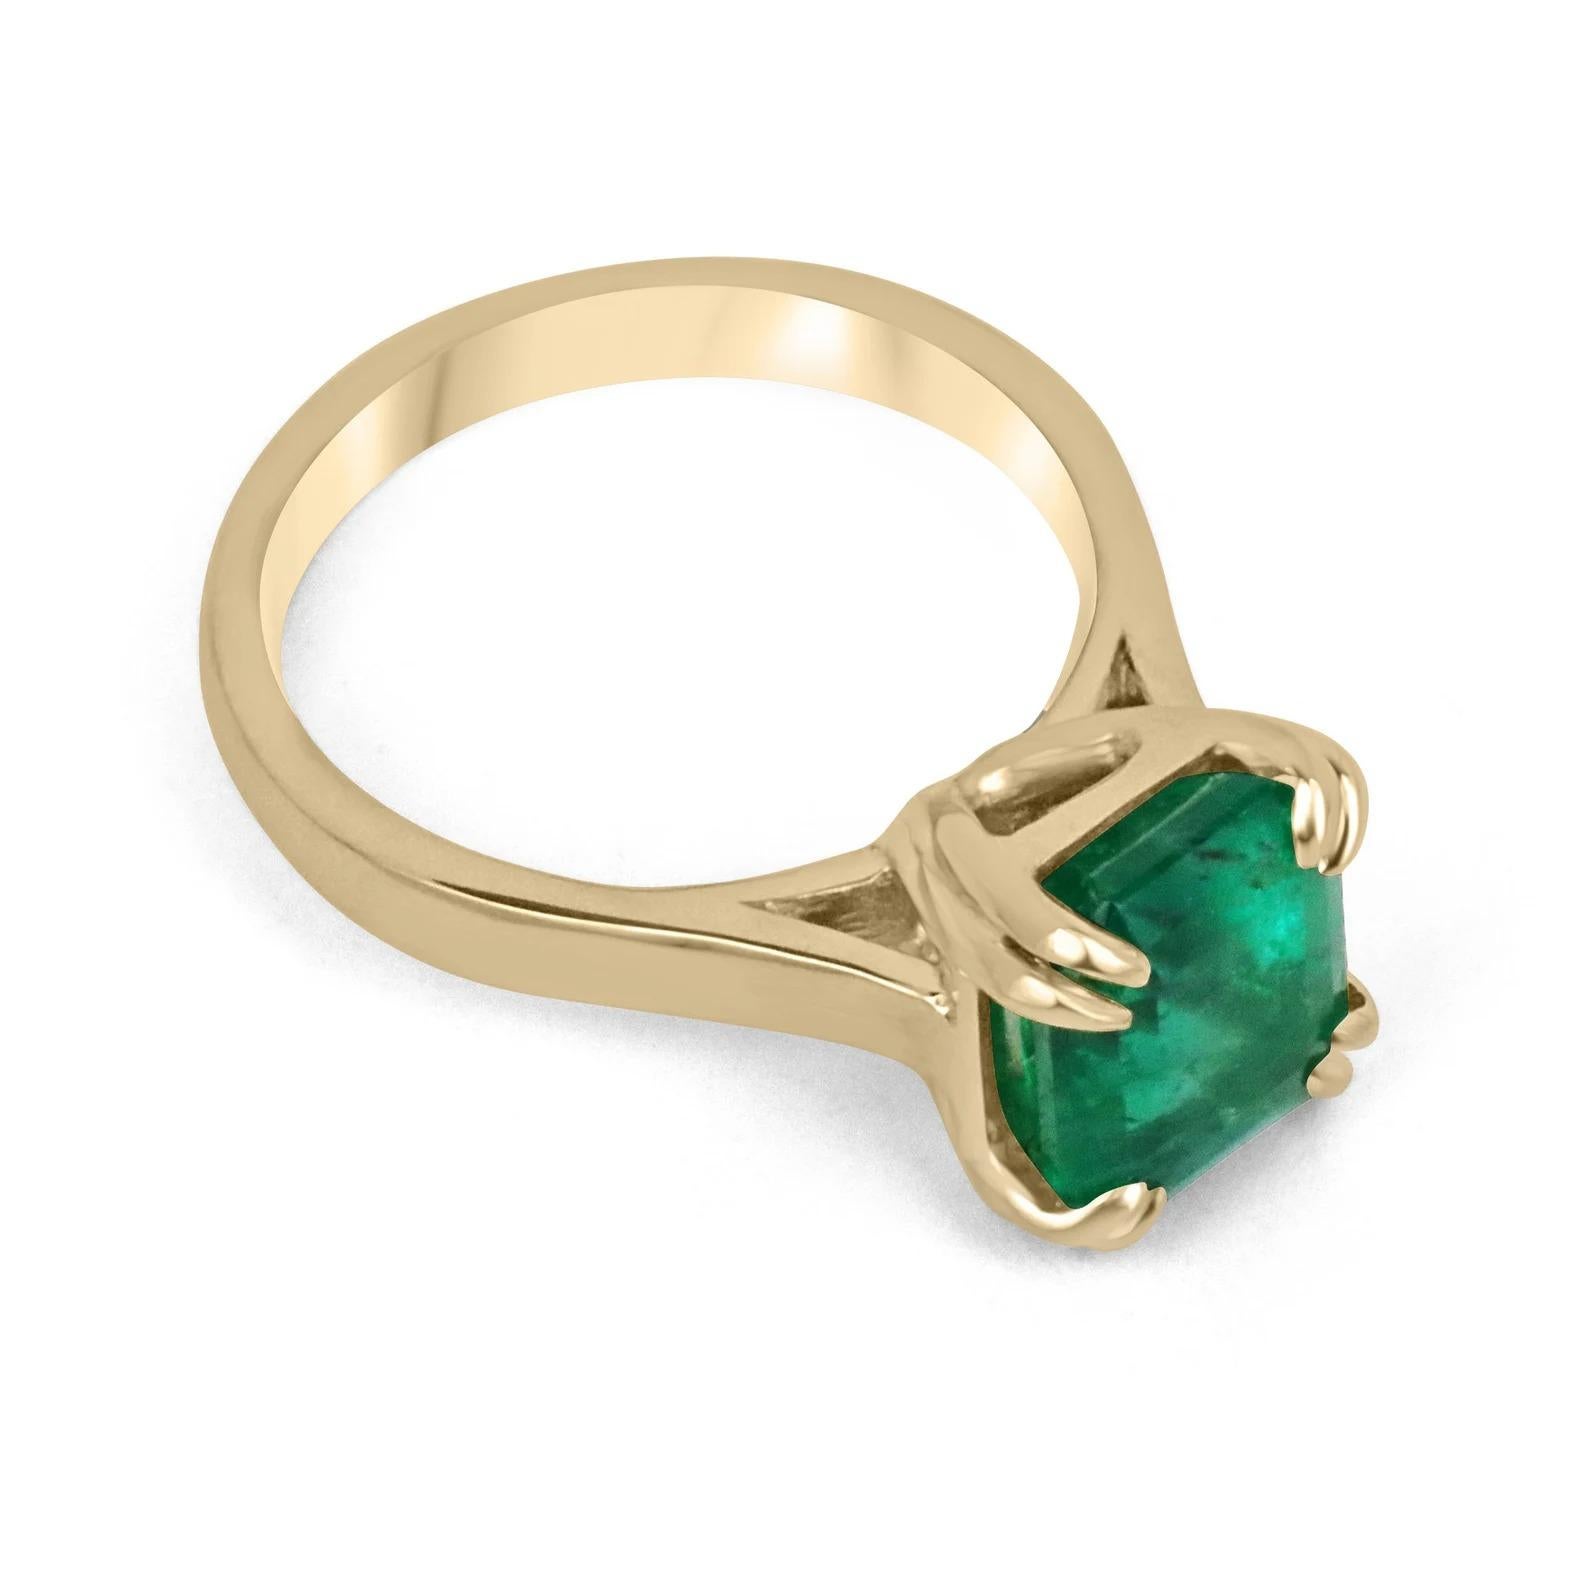 Featured is a classic and top-of-the-line Colombian emerald with an extremely rare AAA+ quality solitaire engagement/right-hand ring. This luxurious piece showcases a remarkable 3.24-carat, natural Asscher cut Colombian emerald, displaying a